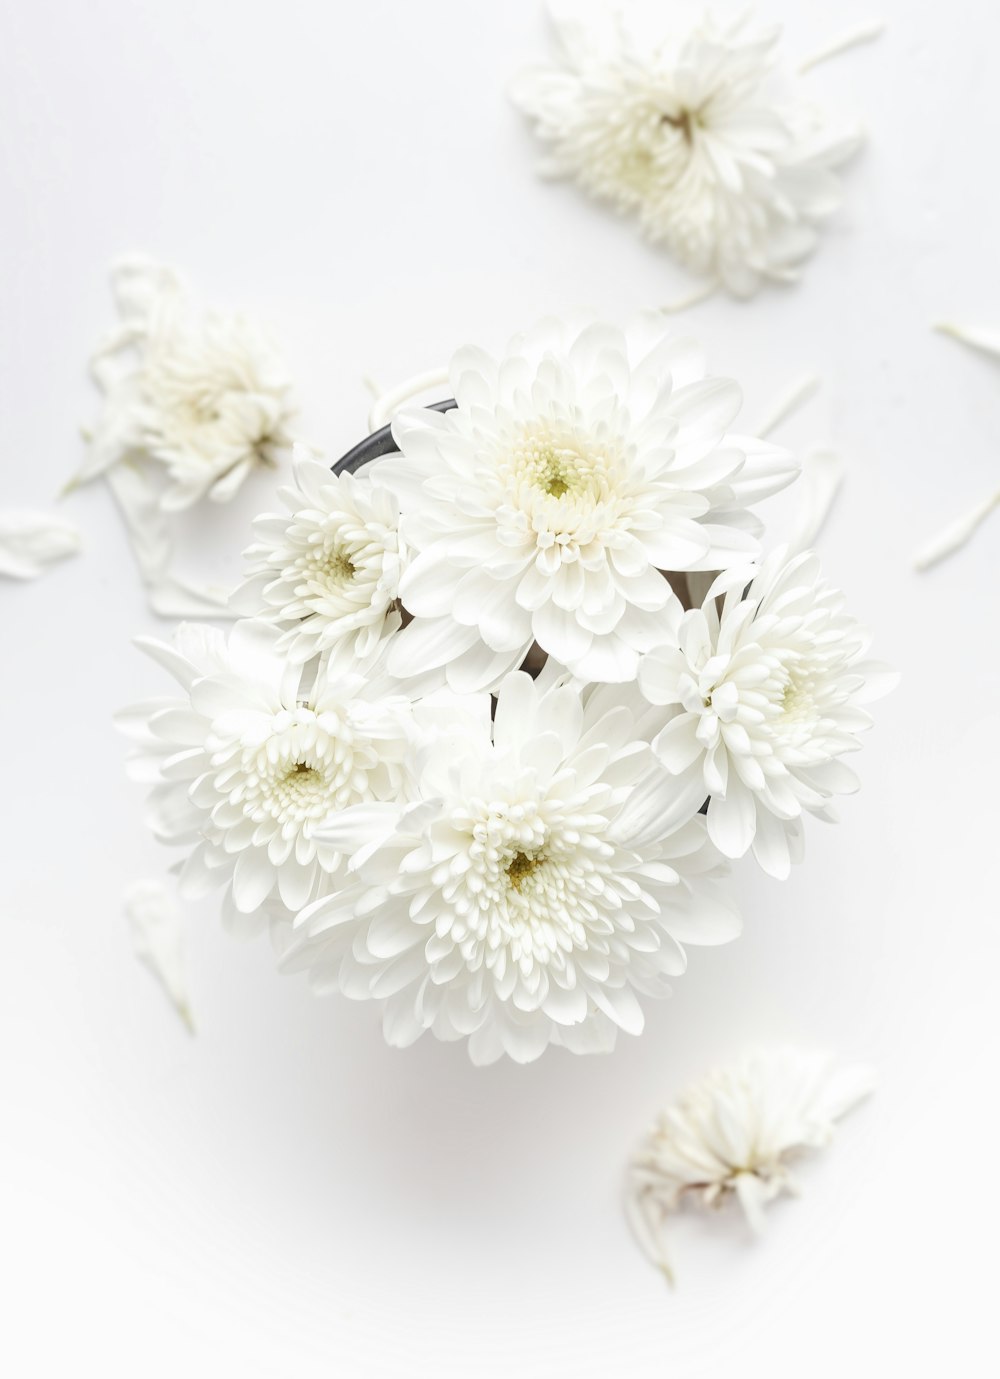 100 White Flower Pictures Download Free Images On Unsplash